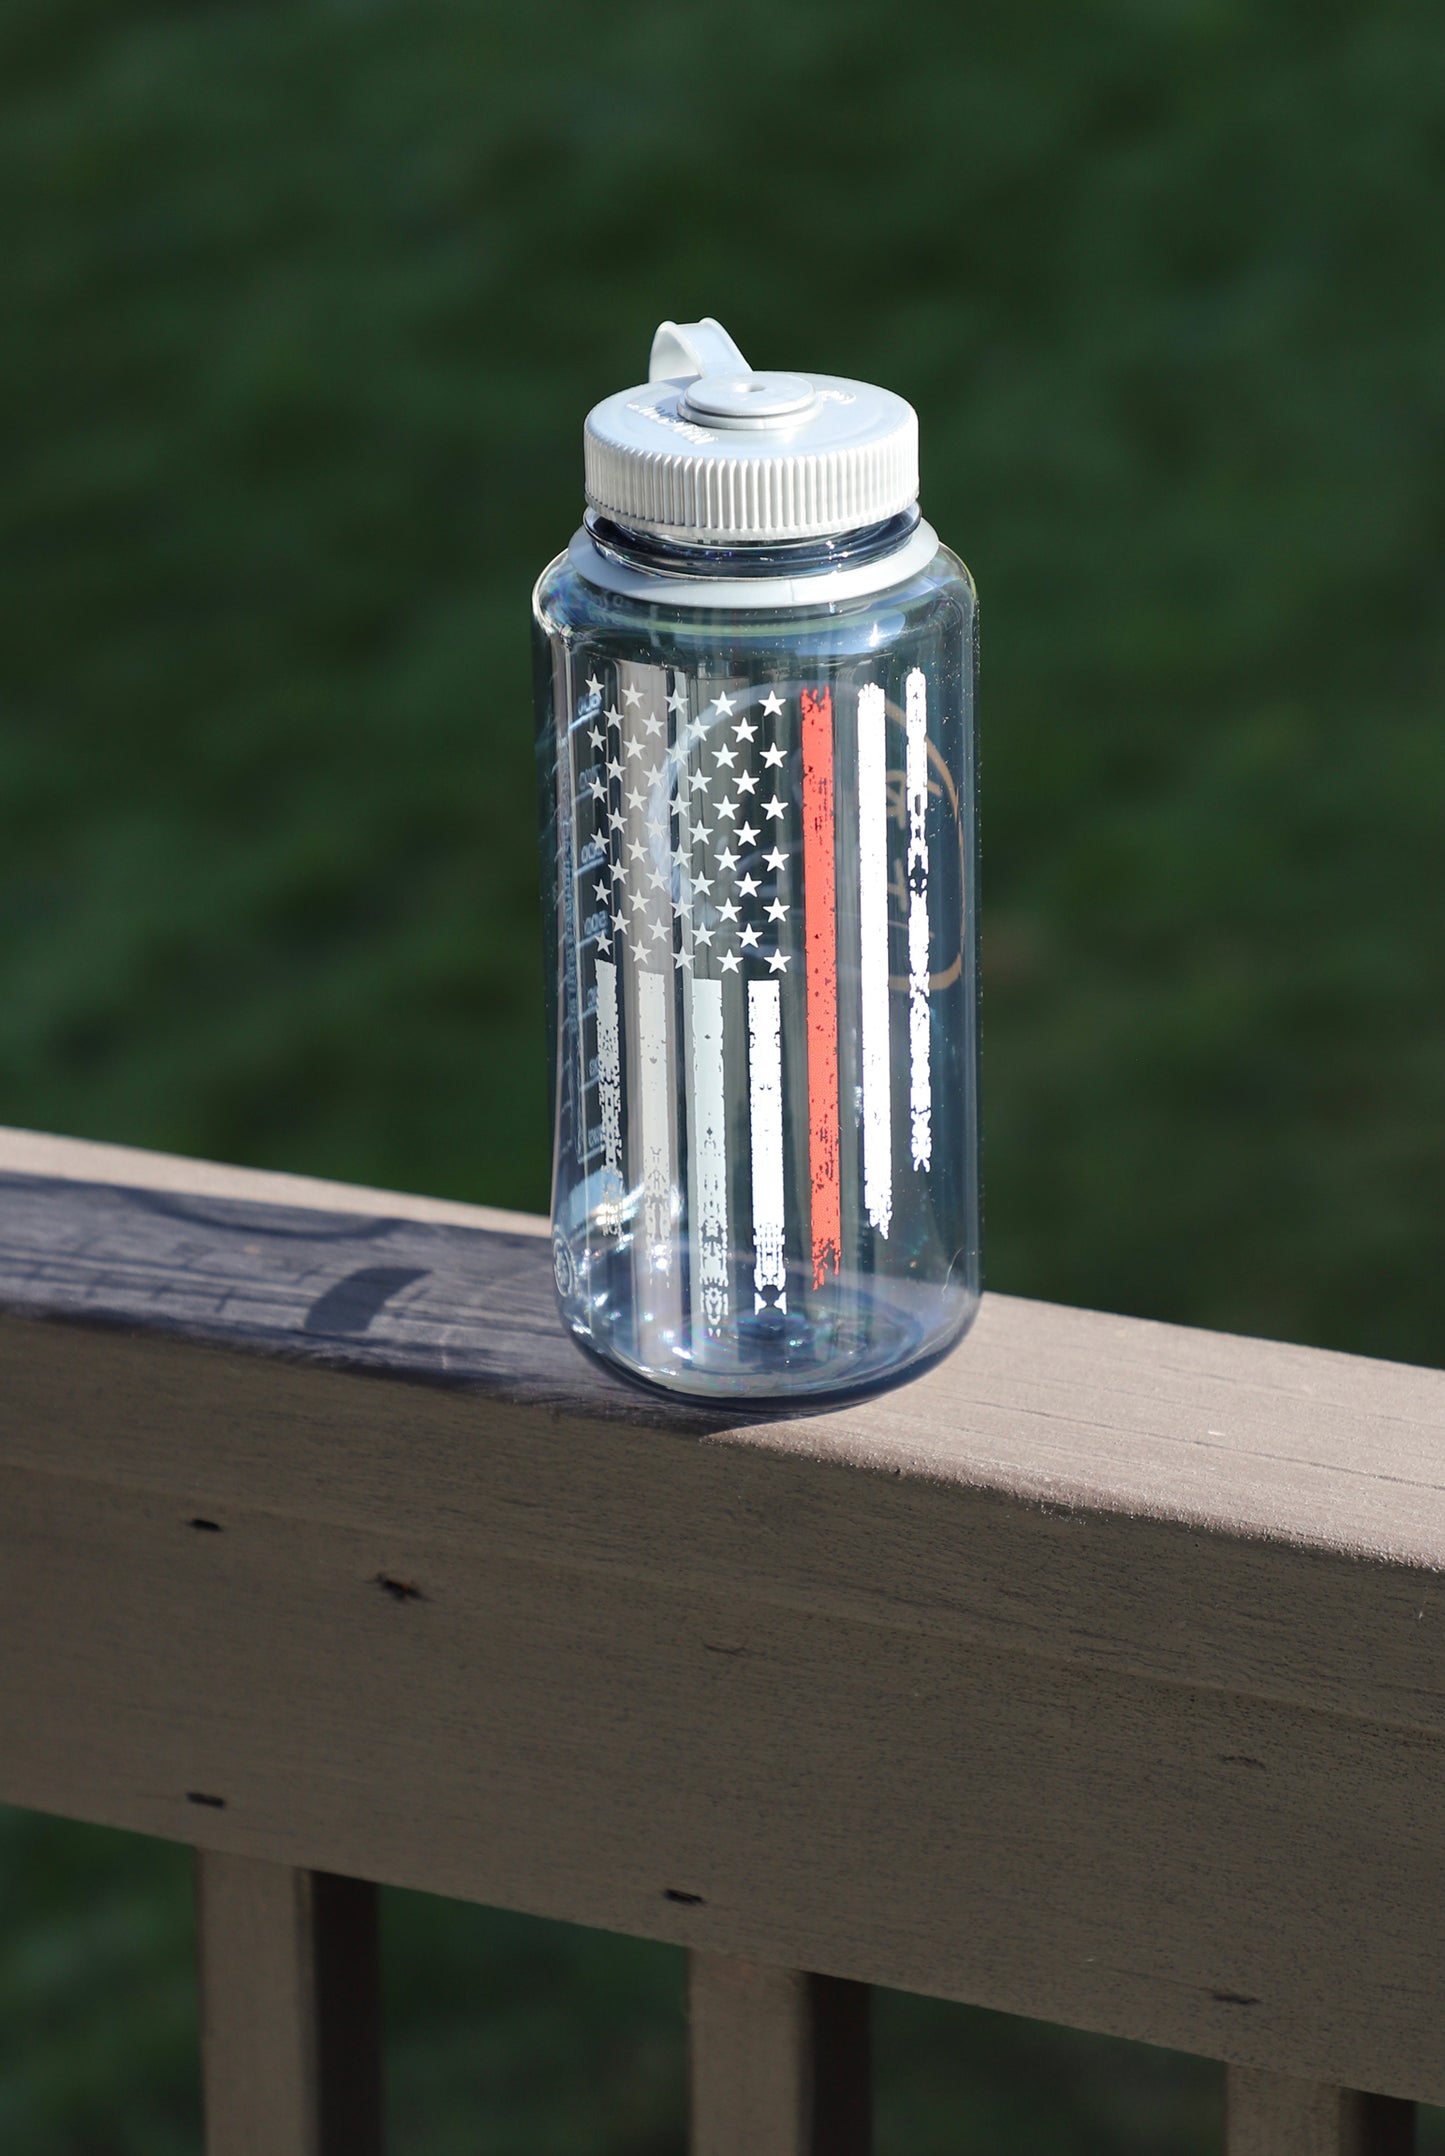 Wavy Blue Red Thin Line Flag on 32 oz Motivational Tracking Water Bottle